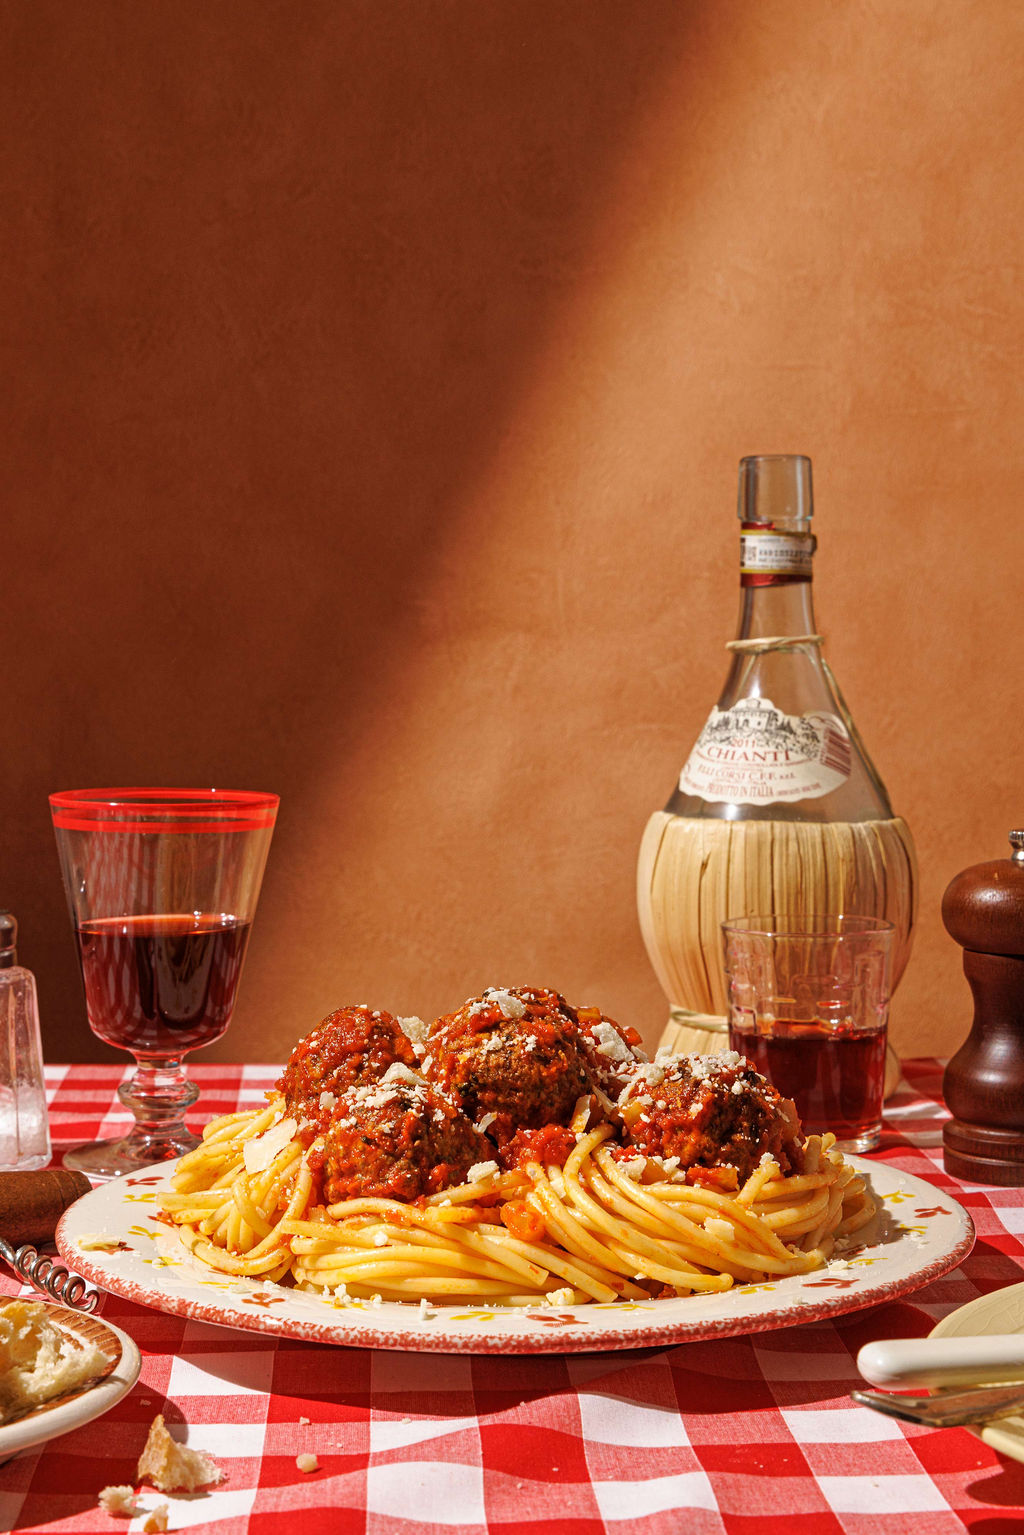 Side on view of juicy gluten free spaghetti and meatballs on a table with red wine